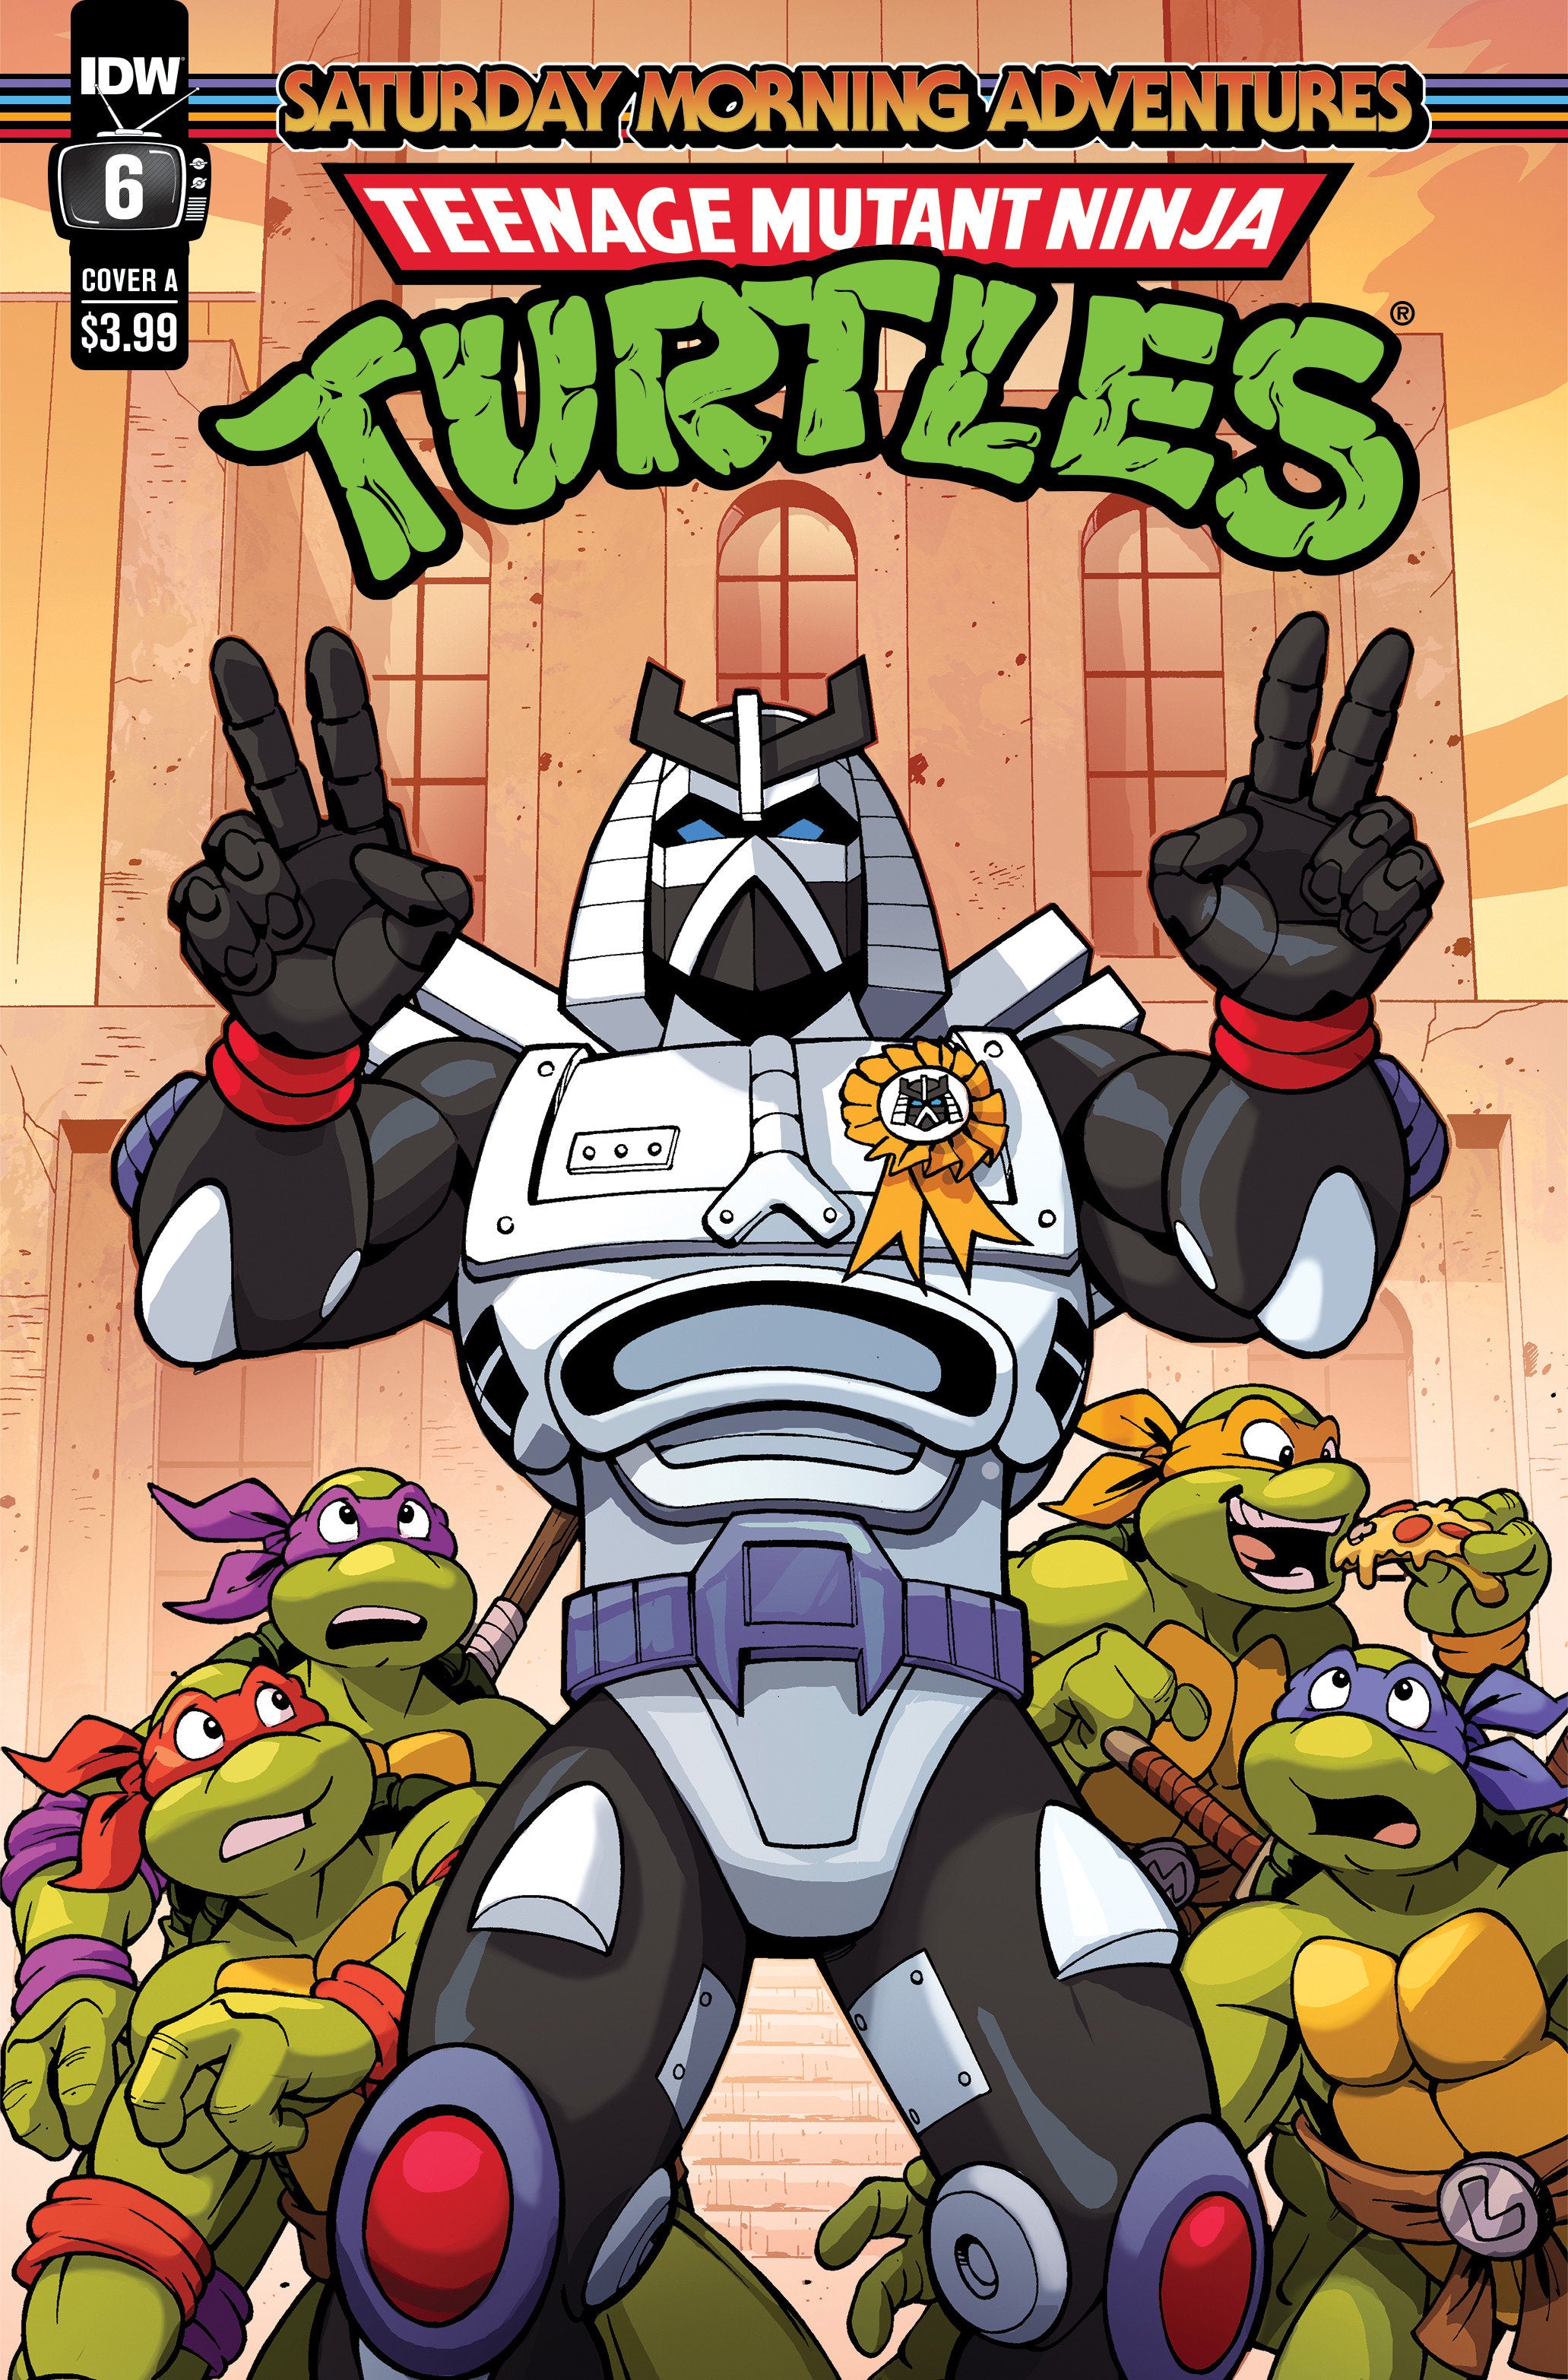 Teenage Mutant Ninja Turtles: Saturday Morning Adventures #6 Cover A (Lawrence) | Game Master's Emporium (The New GME)